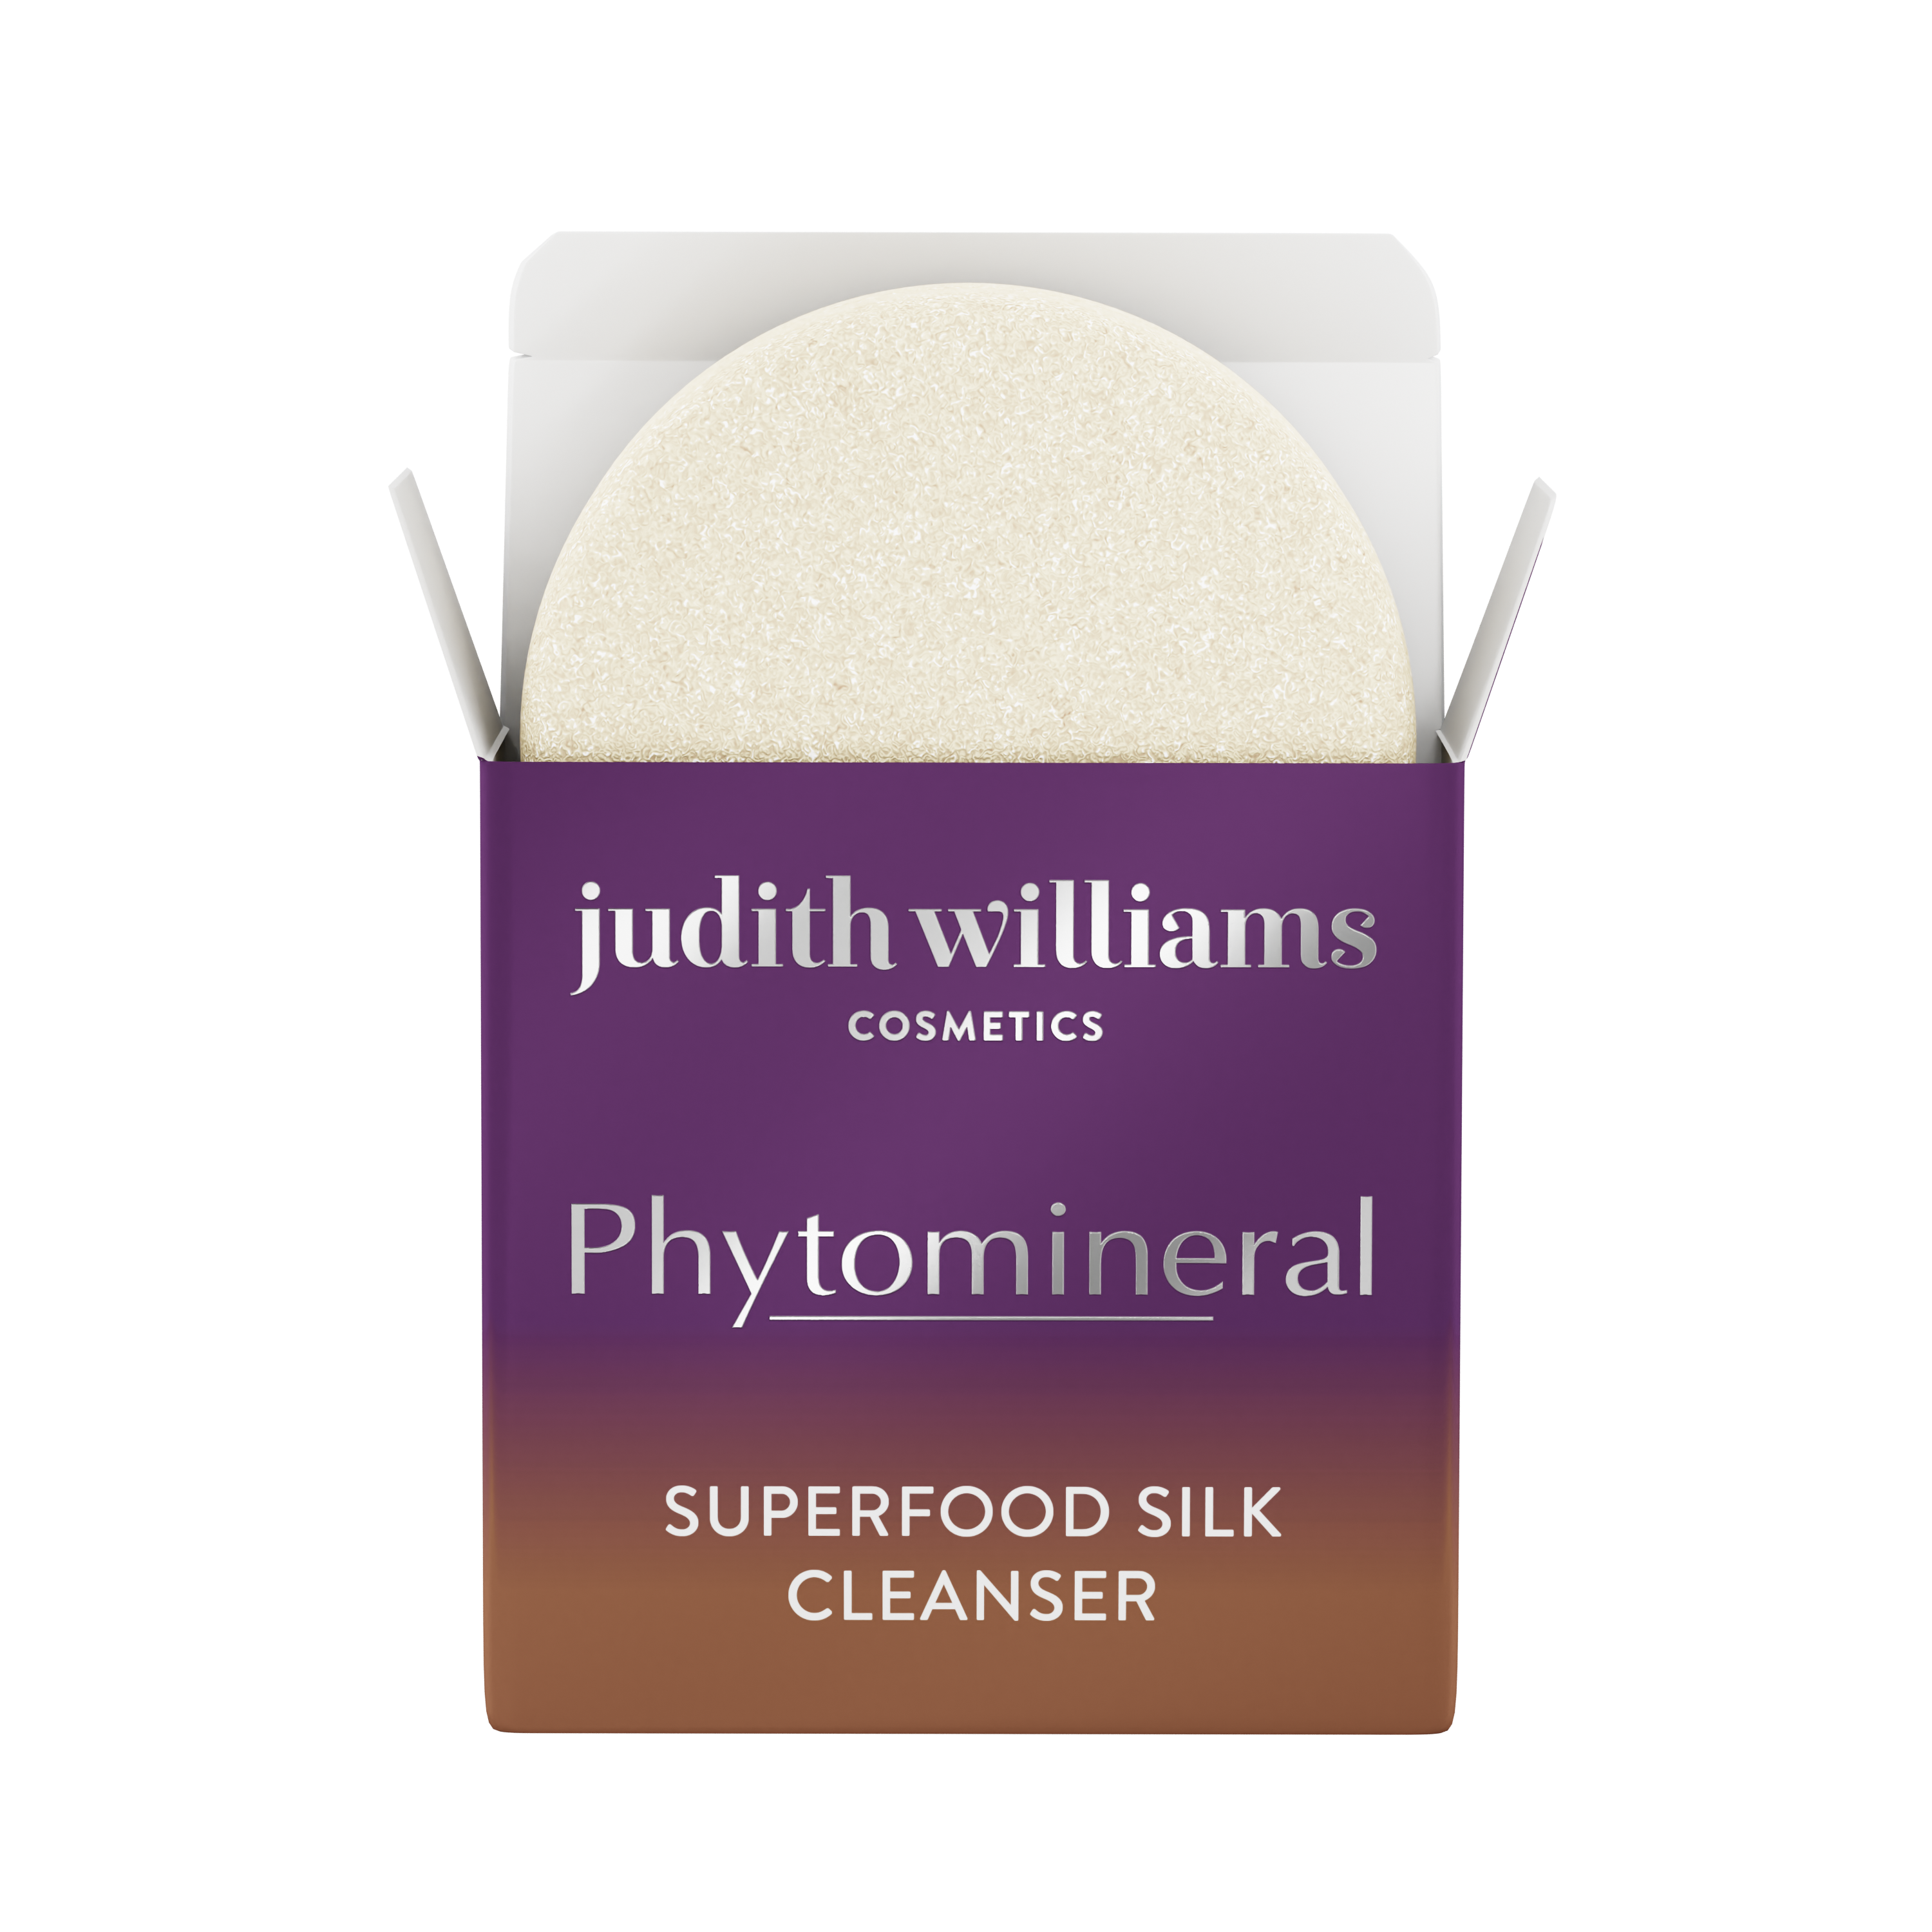 Phytomineral Superfood Silk Cleanser